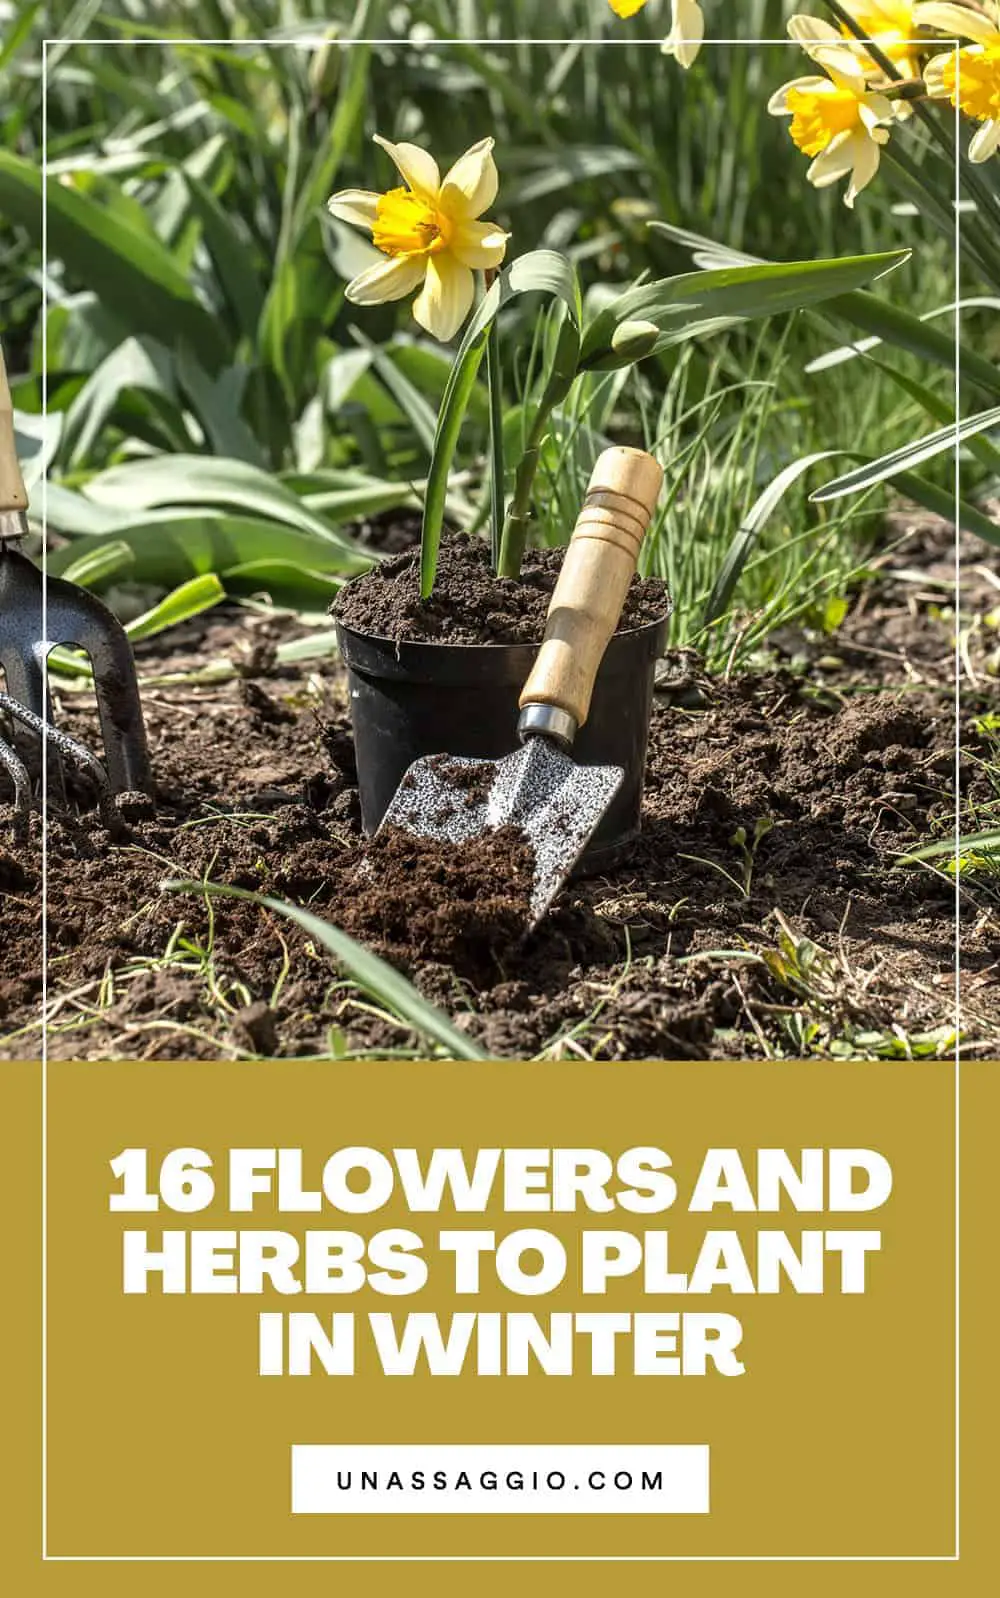 16 Flowers and Herbs to Plant in Winter